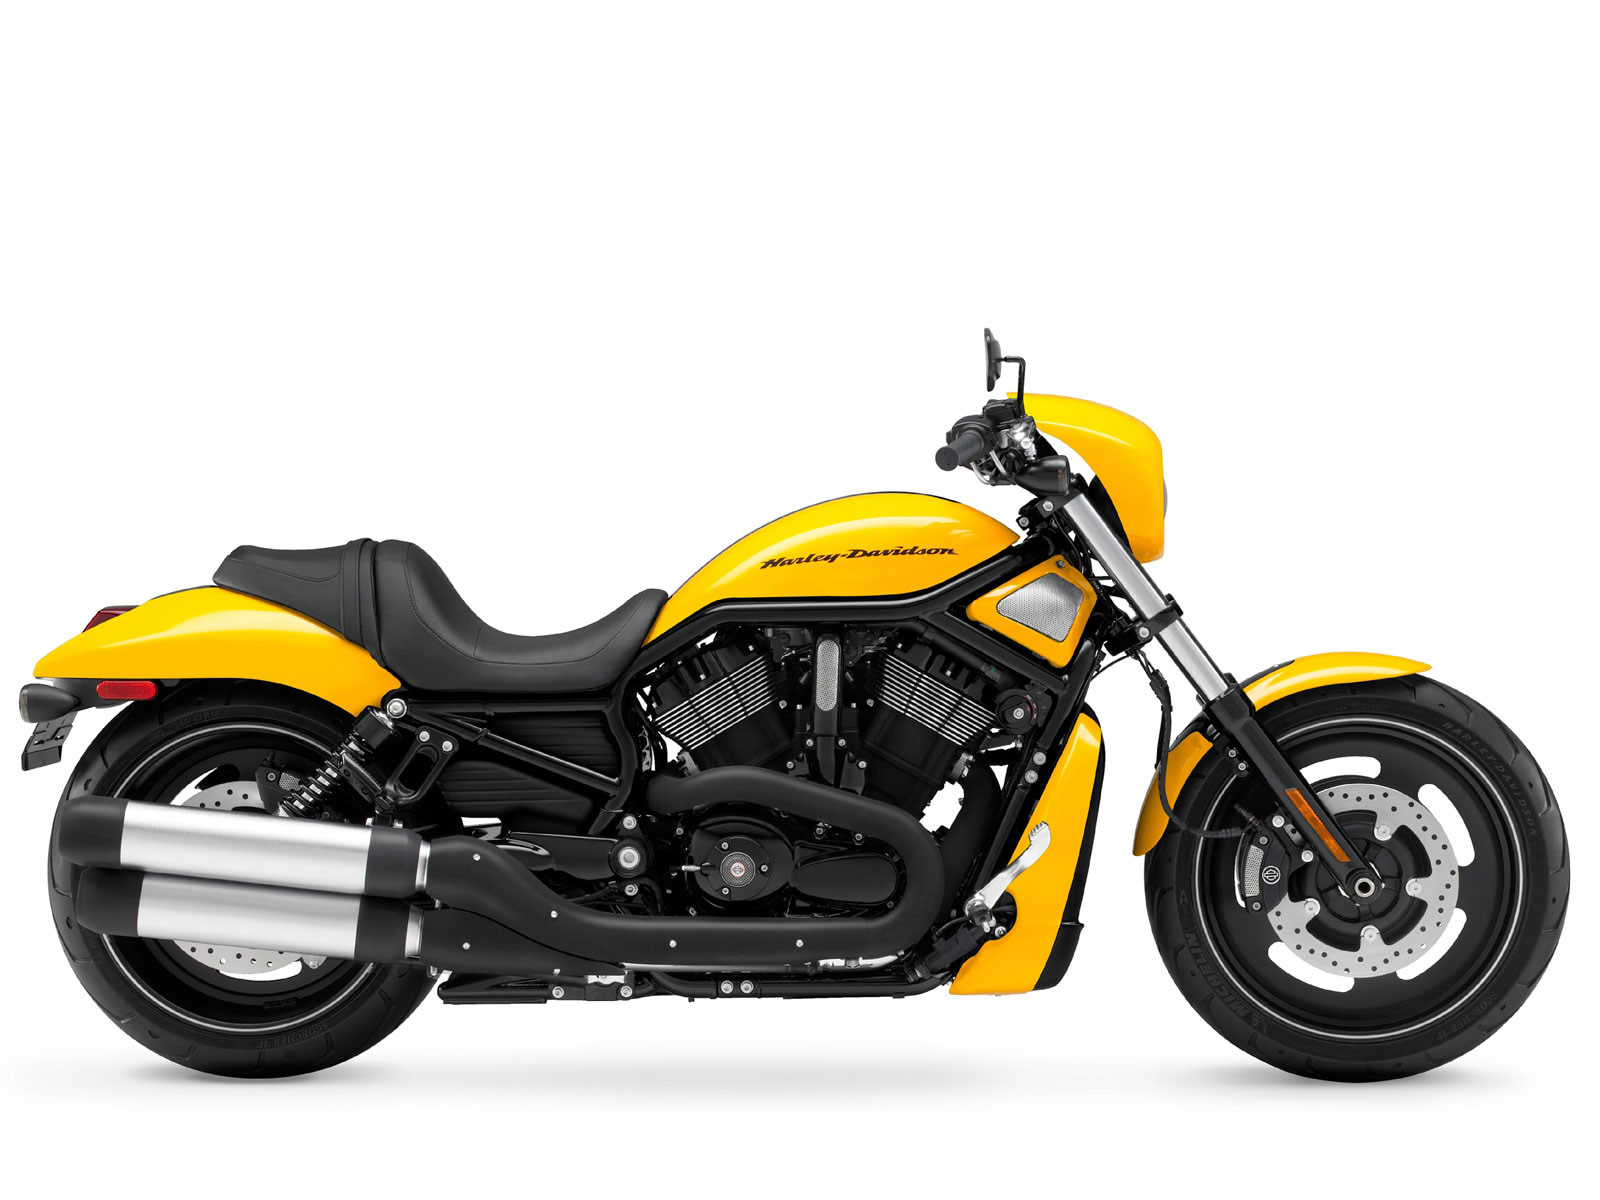 PREVIEW MOTORCYCLE AND CARS Harley Davidson VRSCDX Night Rod